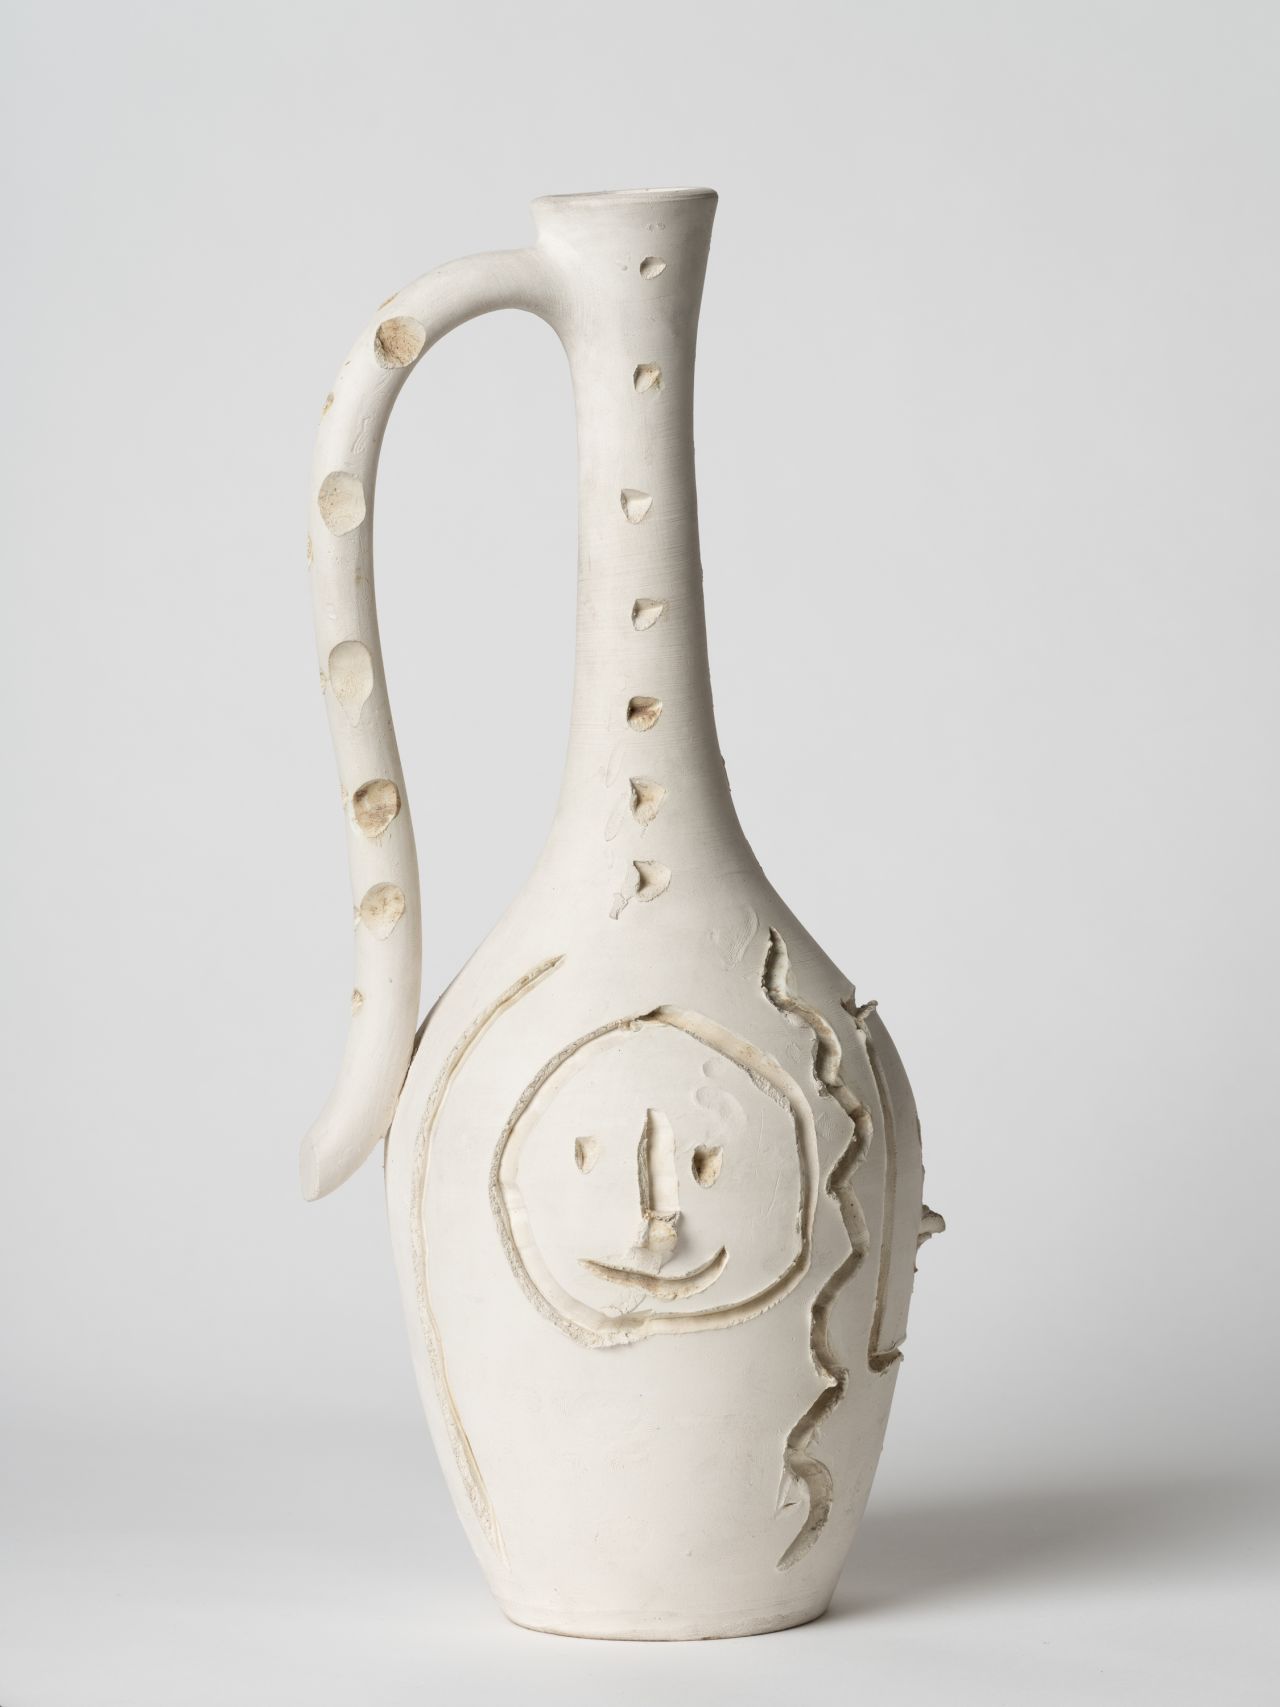 The sale, from the corporate art collection of MGM Resorts, includes paintings, works on paper and this terracotta vessel.